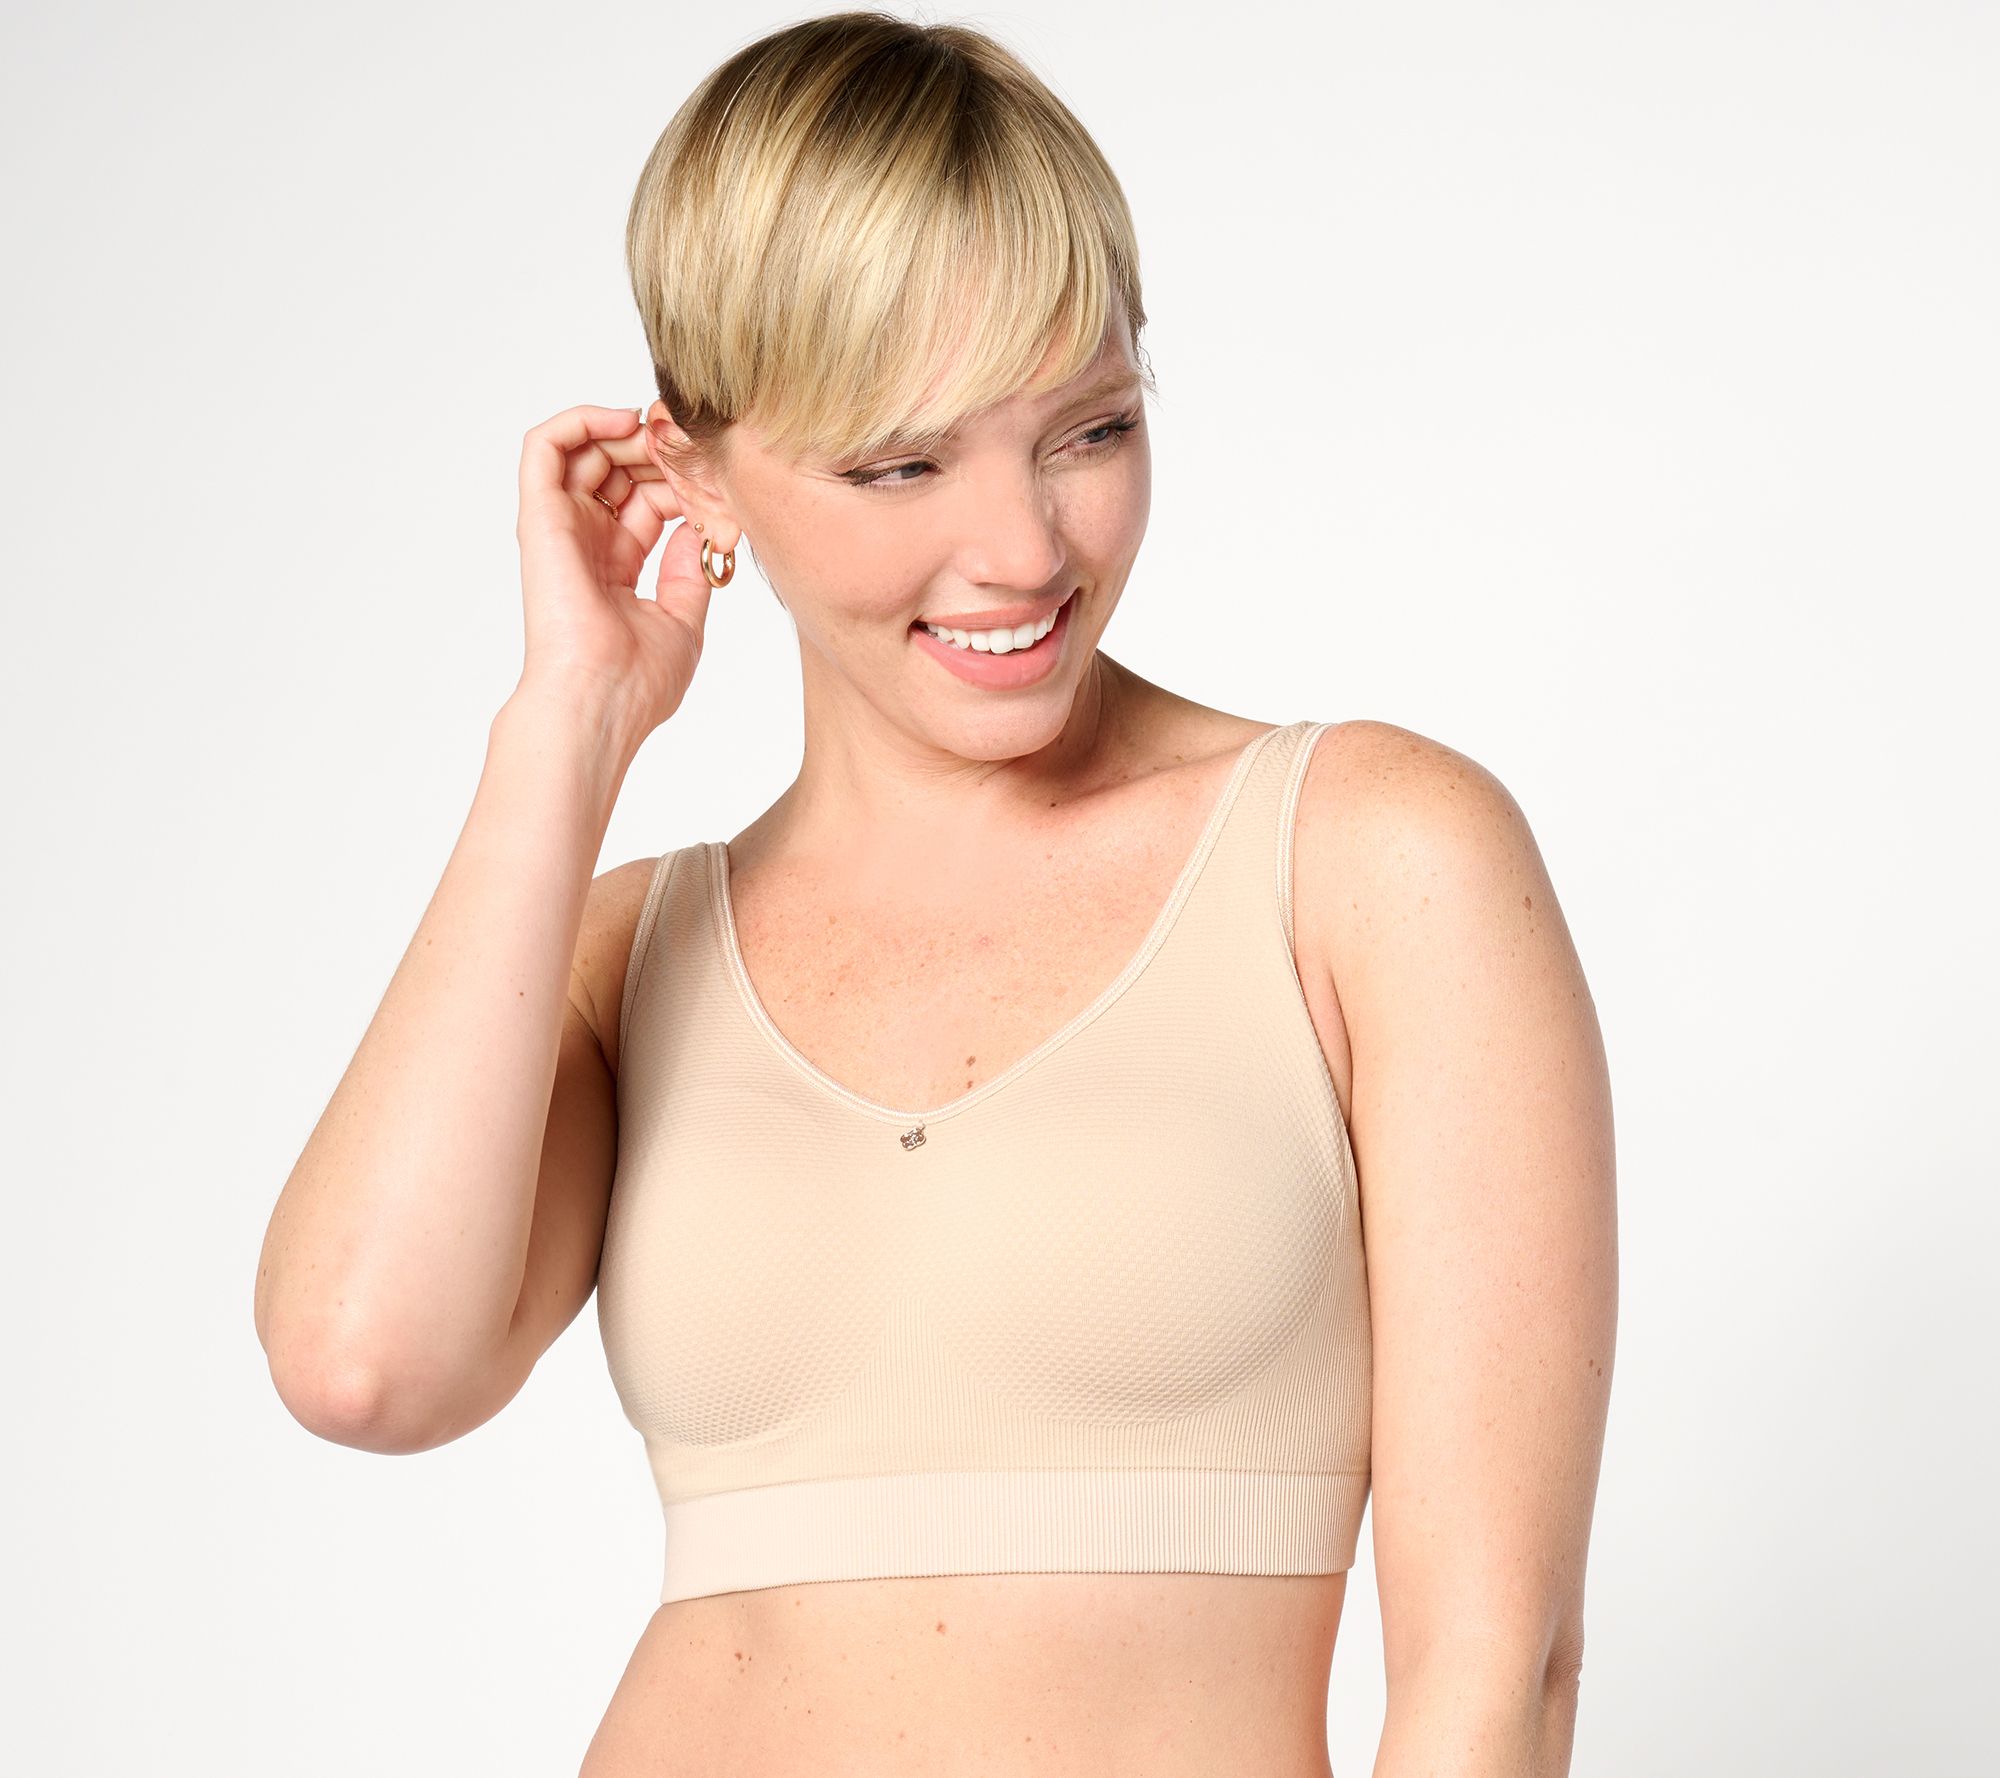 Breezies Wild Rose Seamless Wirefree Support Bra - QVC.com